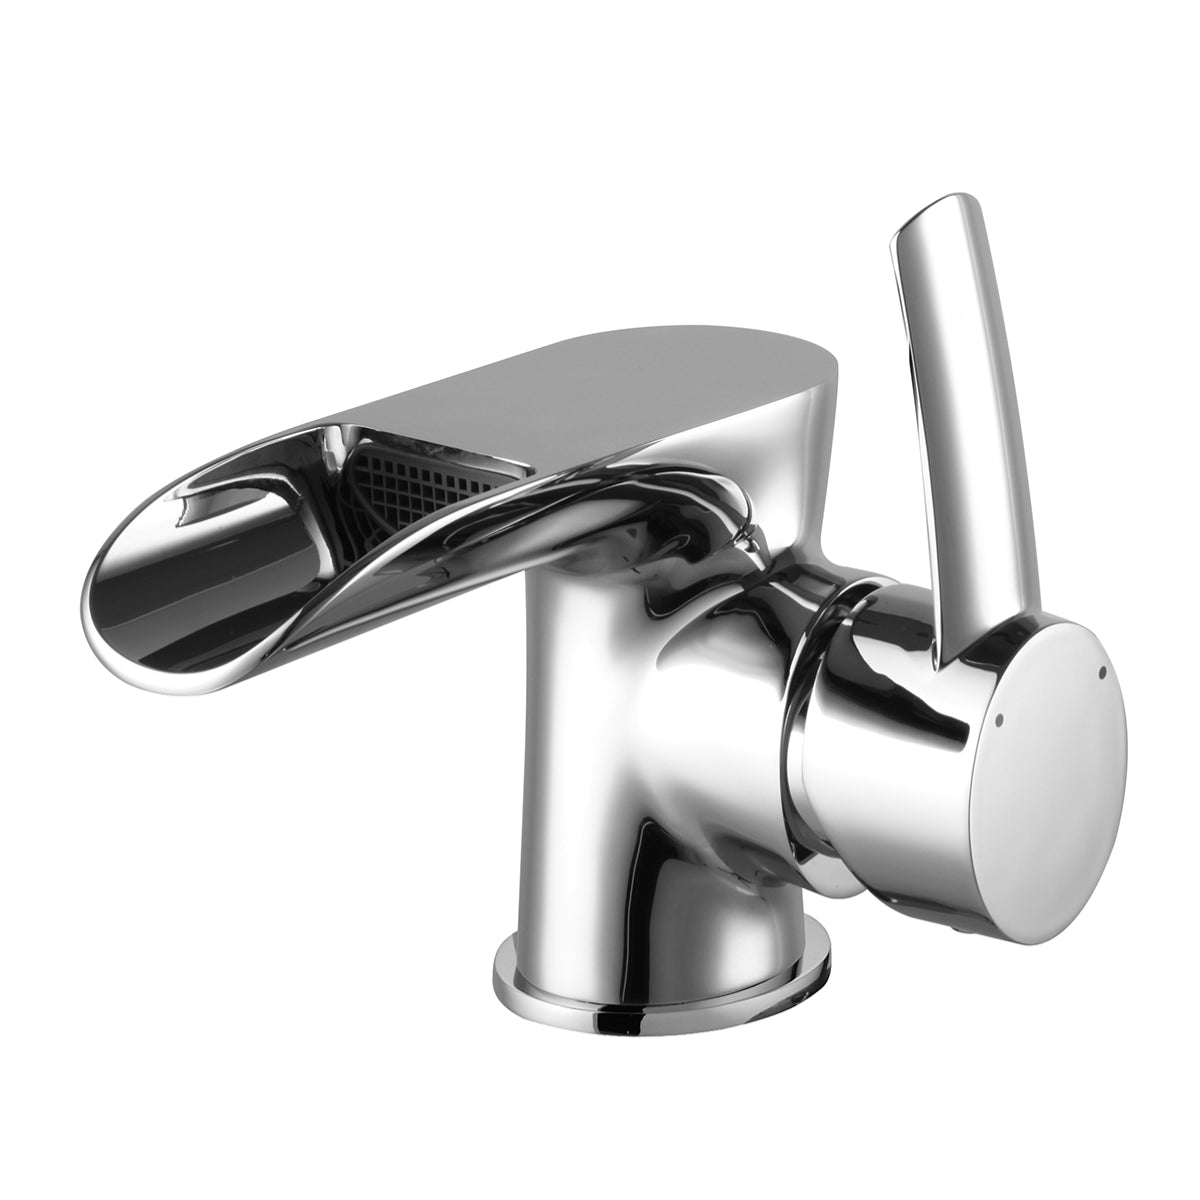 Washbasin faucet with waterfall spout LEMARK LM3246C "ATLANTISS"